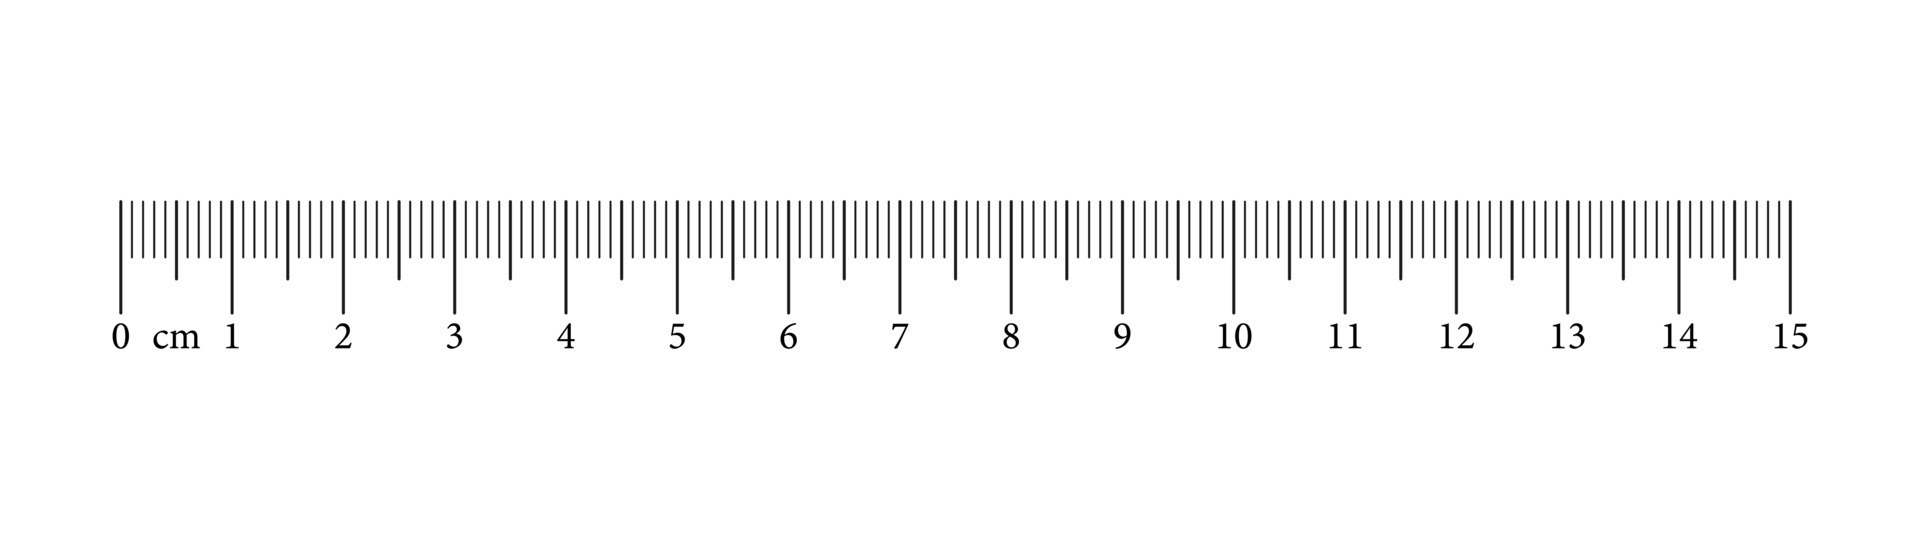 https://static.vecteezy.com/system/resources/previews/023/729/728/original/measuring-chart-with-15-centimeters-ruler-scale-with-numbers-length-measurement-math-distance-height-sewing-tool-graphic-illustration-vector.jpg